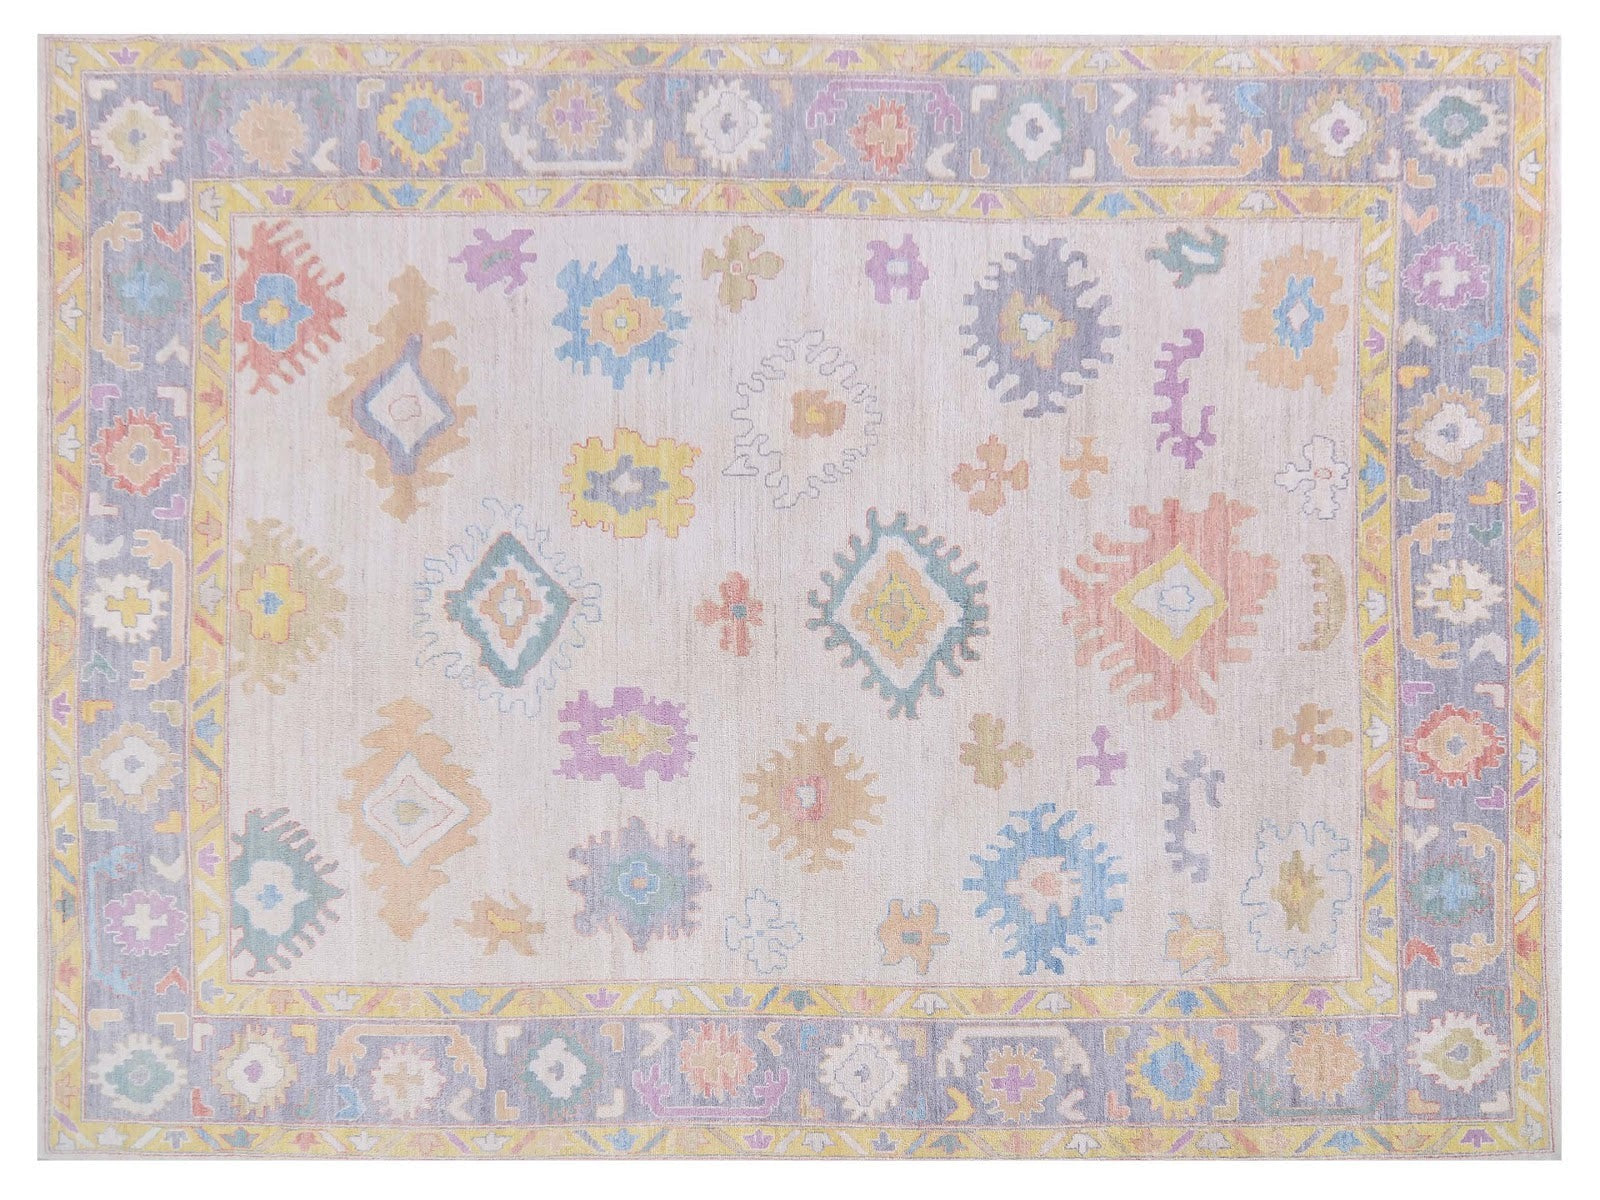 9x12 Faberge rug in transitional design with blues, yellows, oranges, and purples, framed by a grayish-blue border, hand-knotted in 100% wool